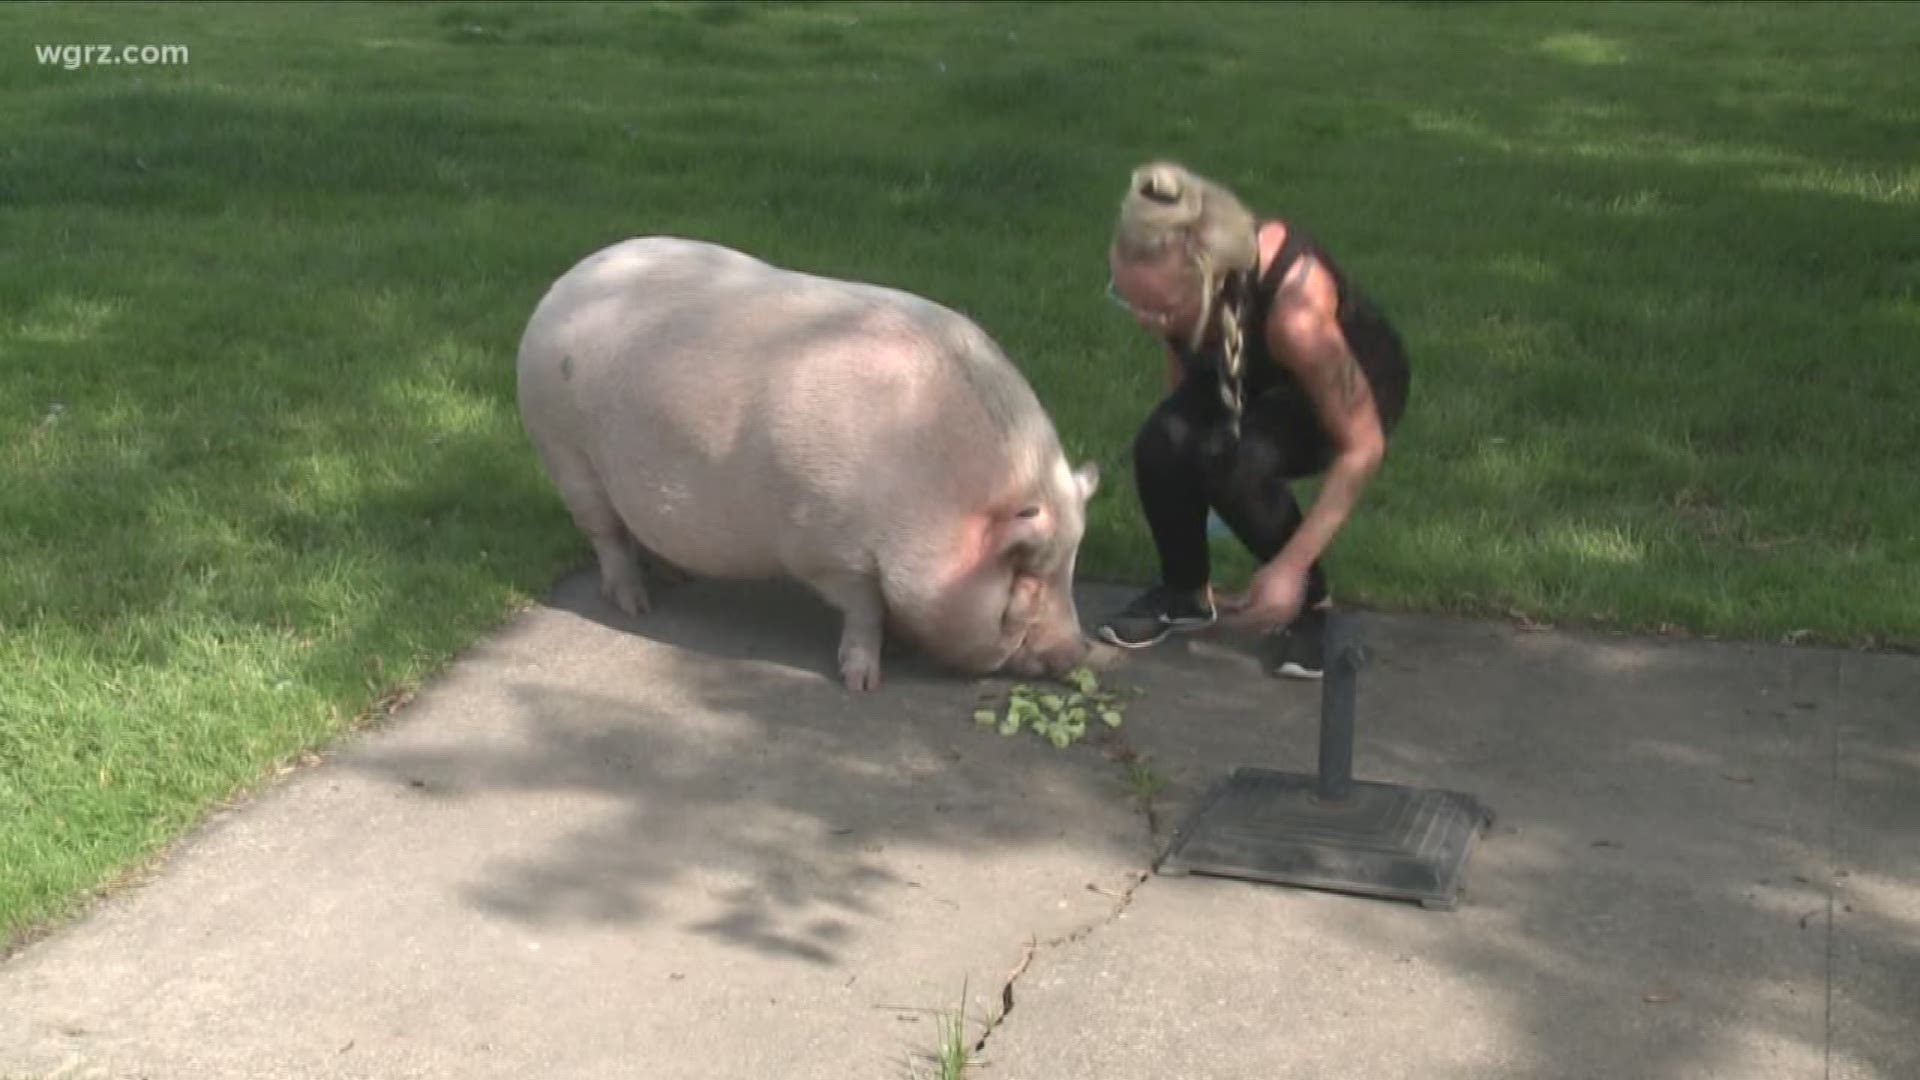 A couple in Amherst needed to request a special permit for their pet pig named "porkchop".